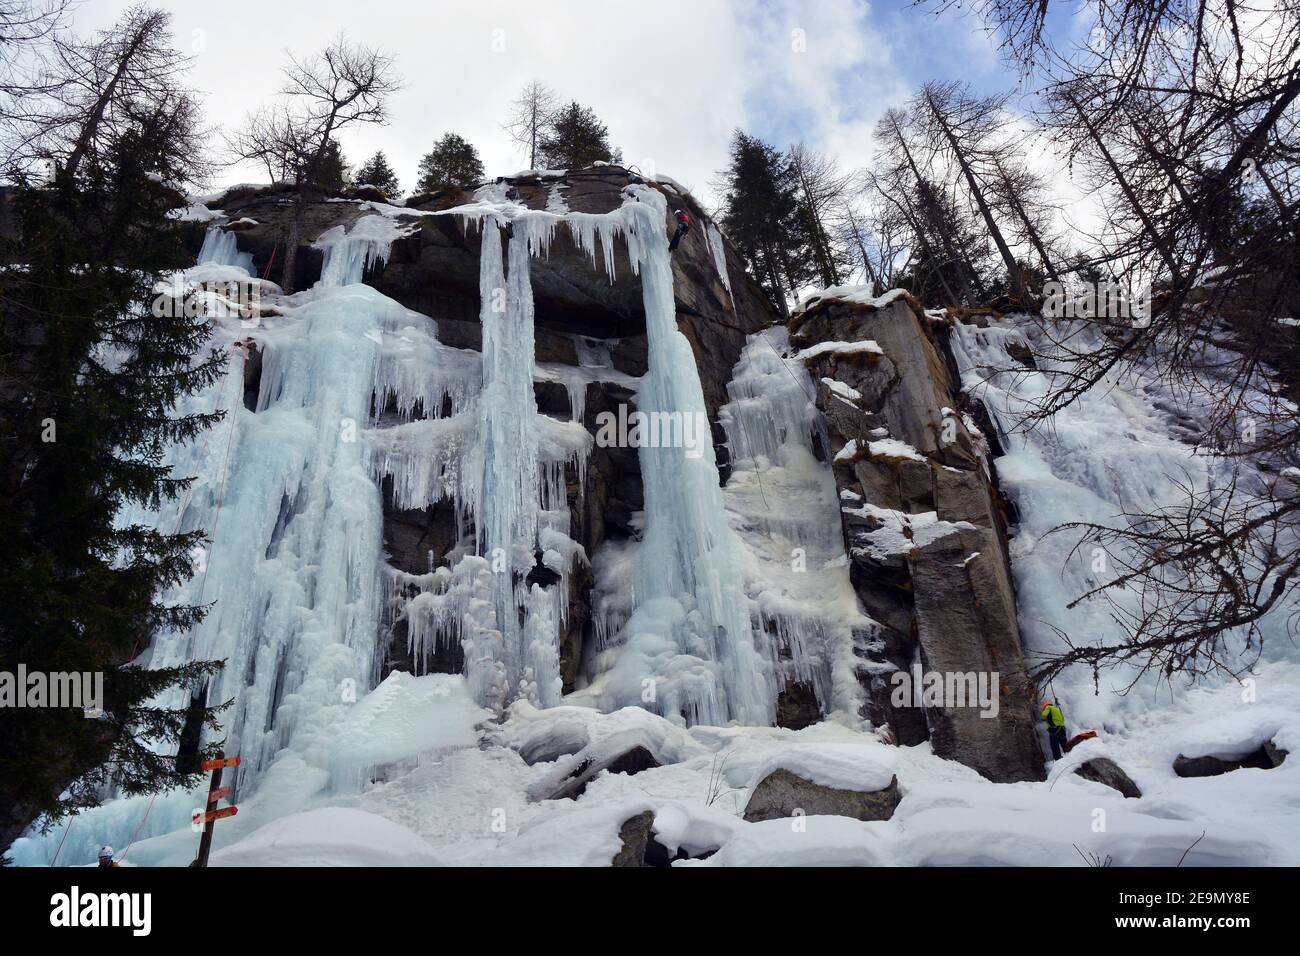 Mountaineer climbs an icefall in Alps of Piedmont, Italy. Stock Photo